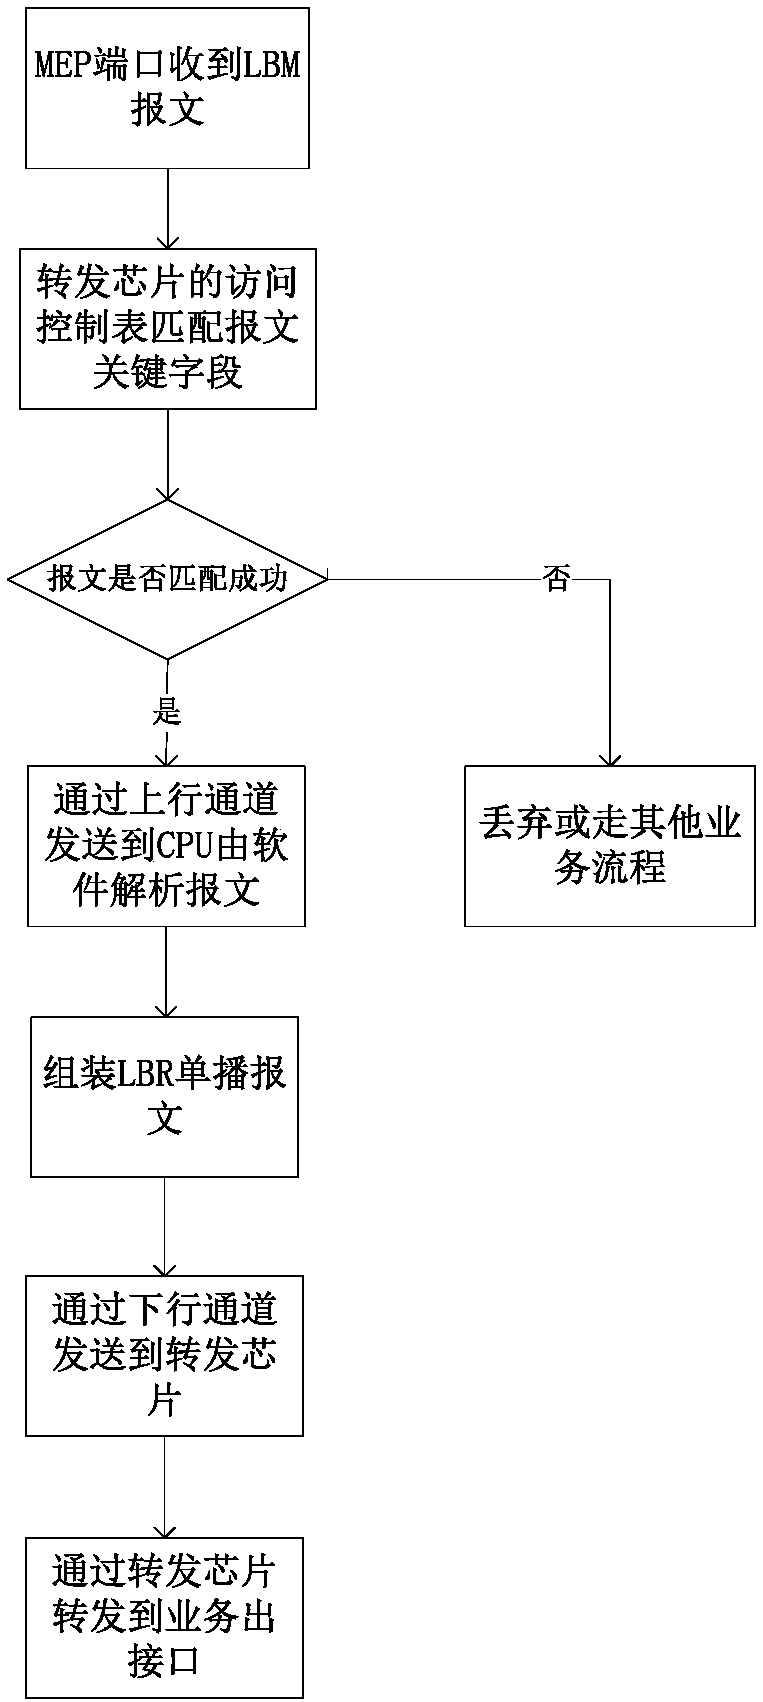 Method and system for realizing mutual binding of MAC addresses of local MEP and remote MEP